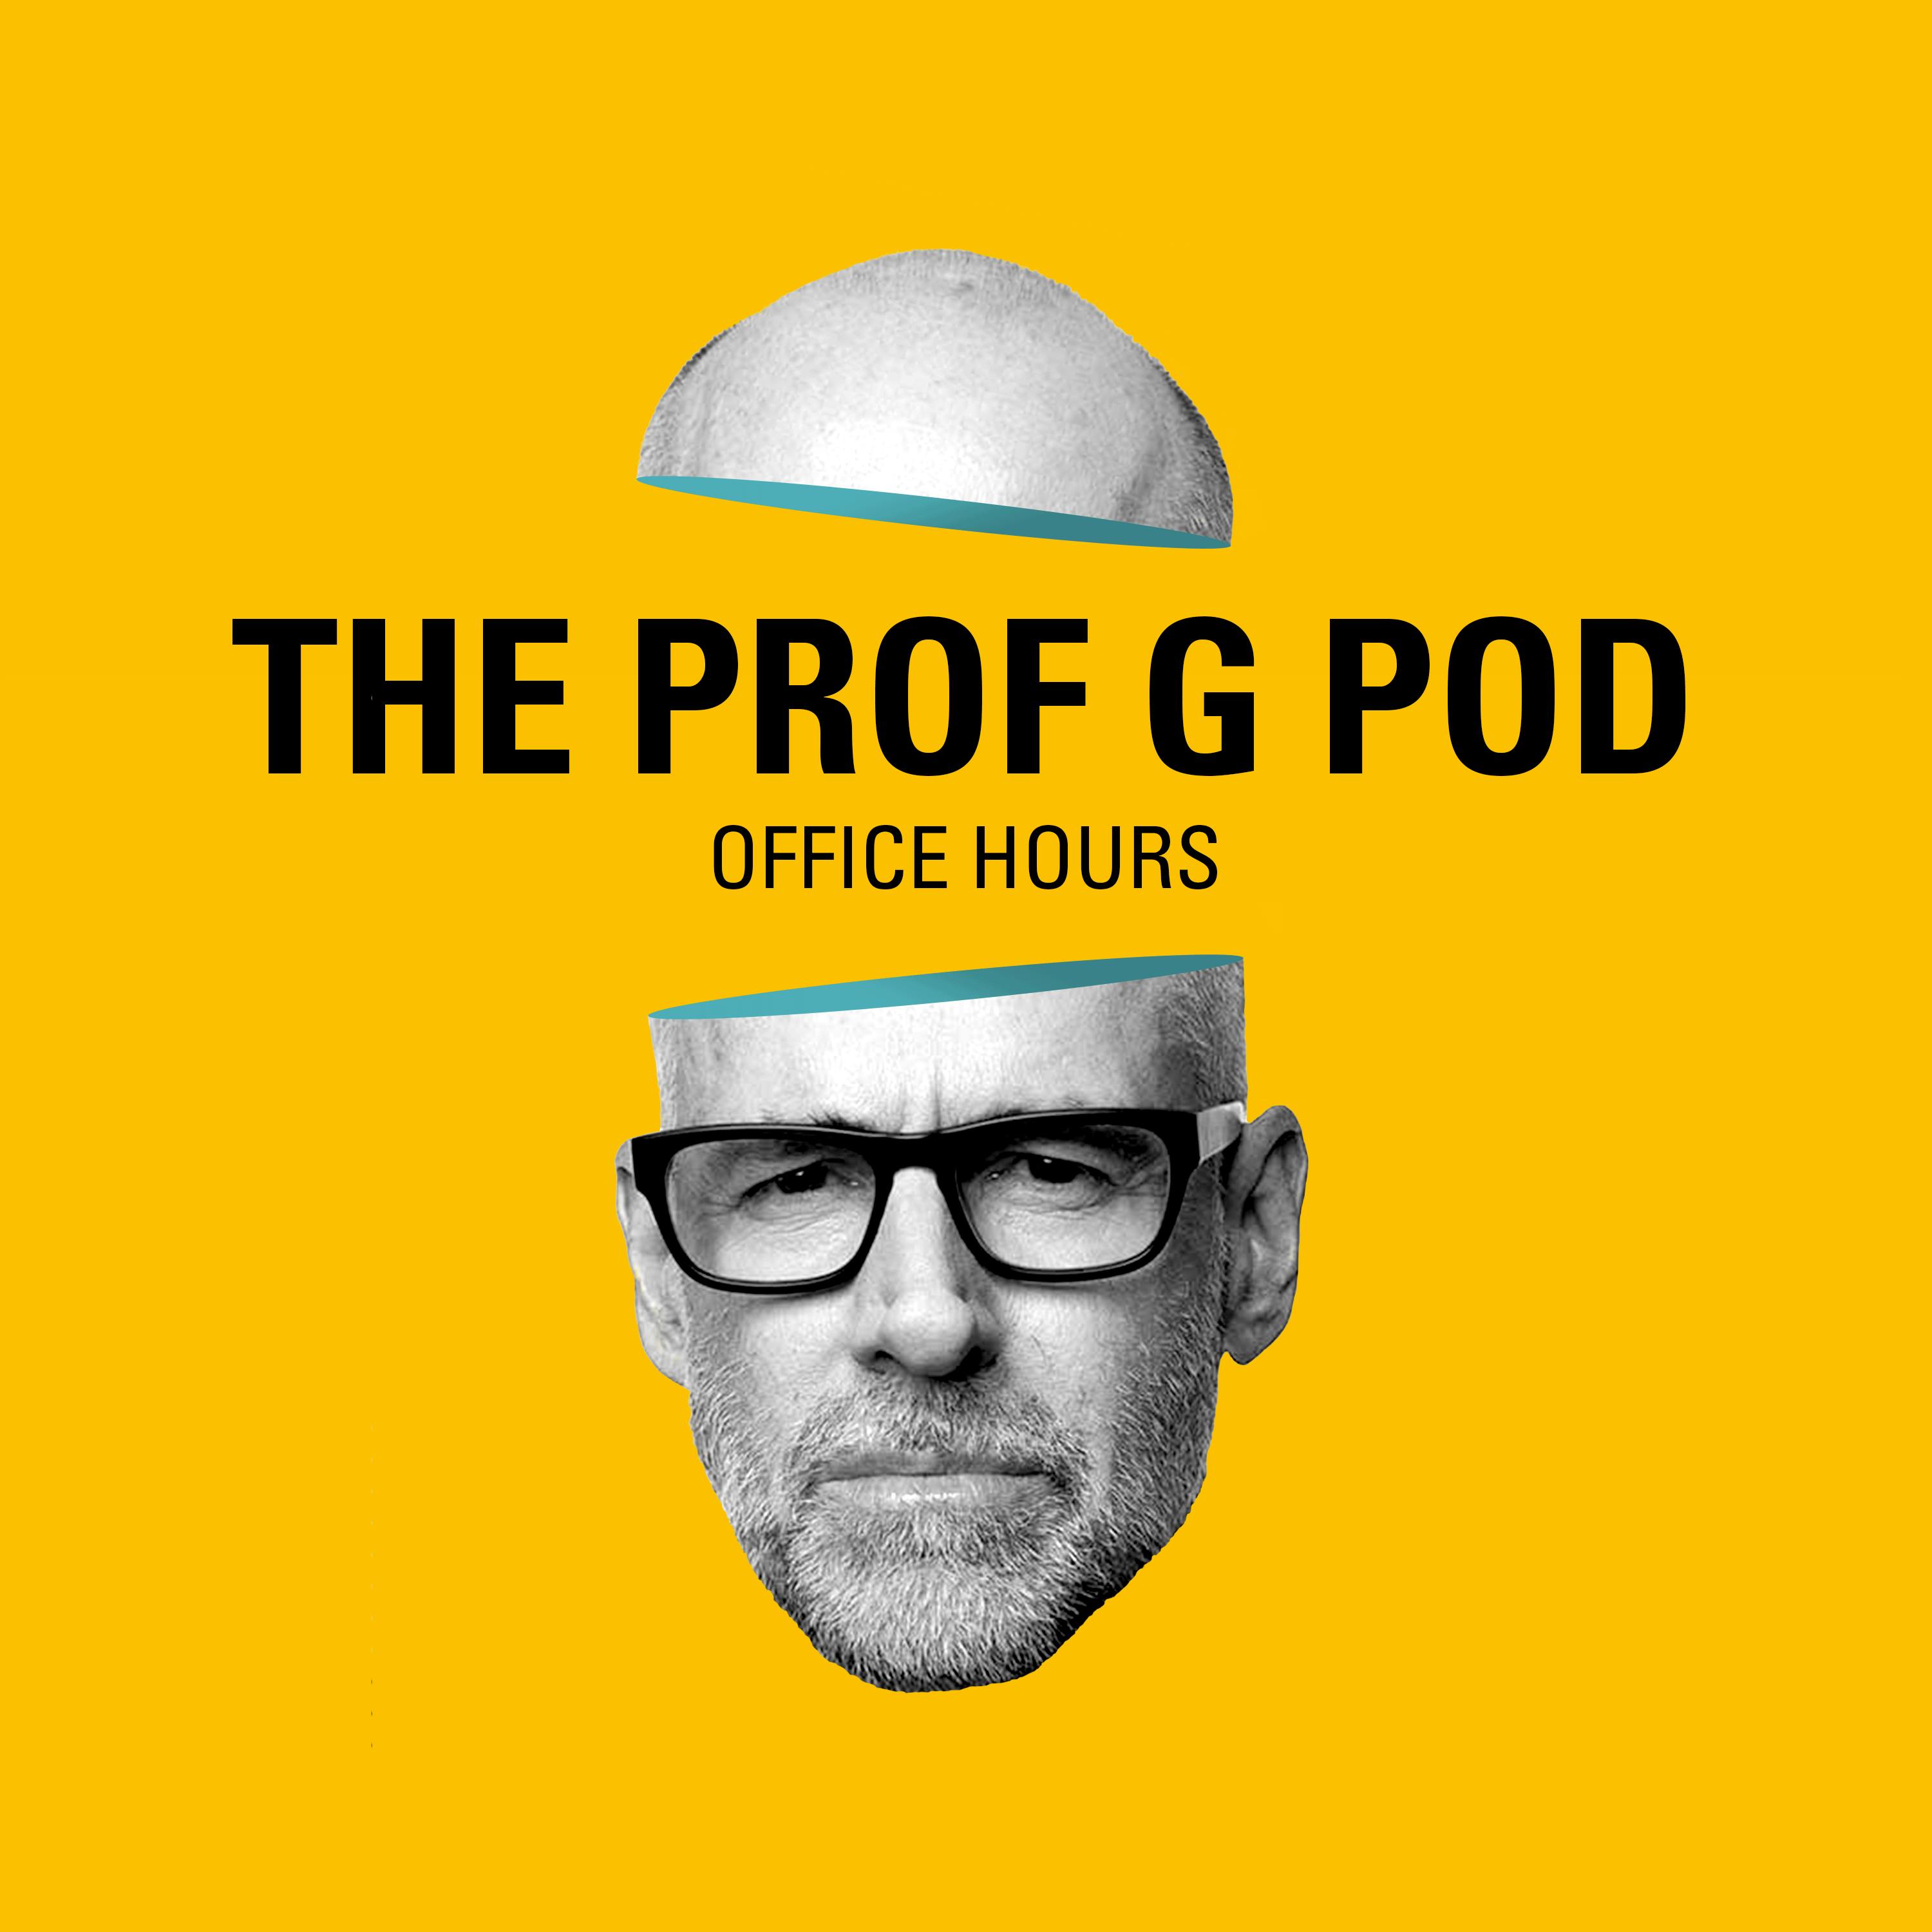 Office Hours: The Business of Podcasting, Leaving Your Job To Start A Business, and the Pros and Cons of Stock Buybacks